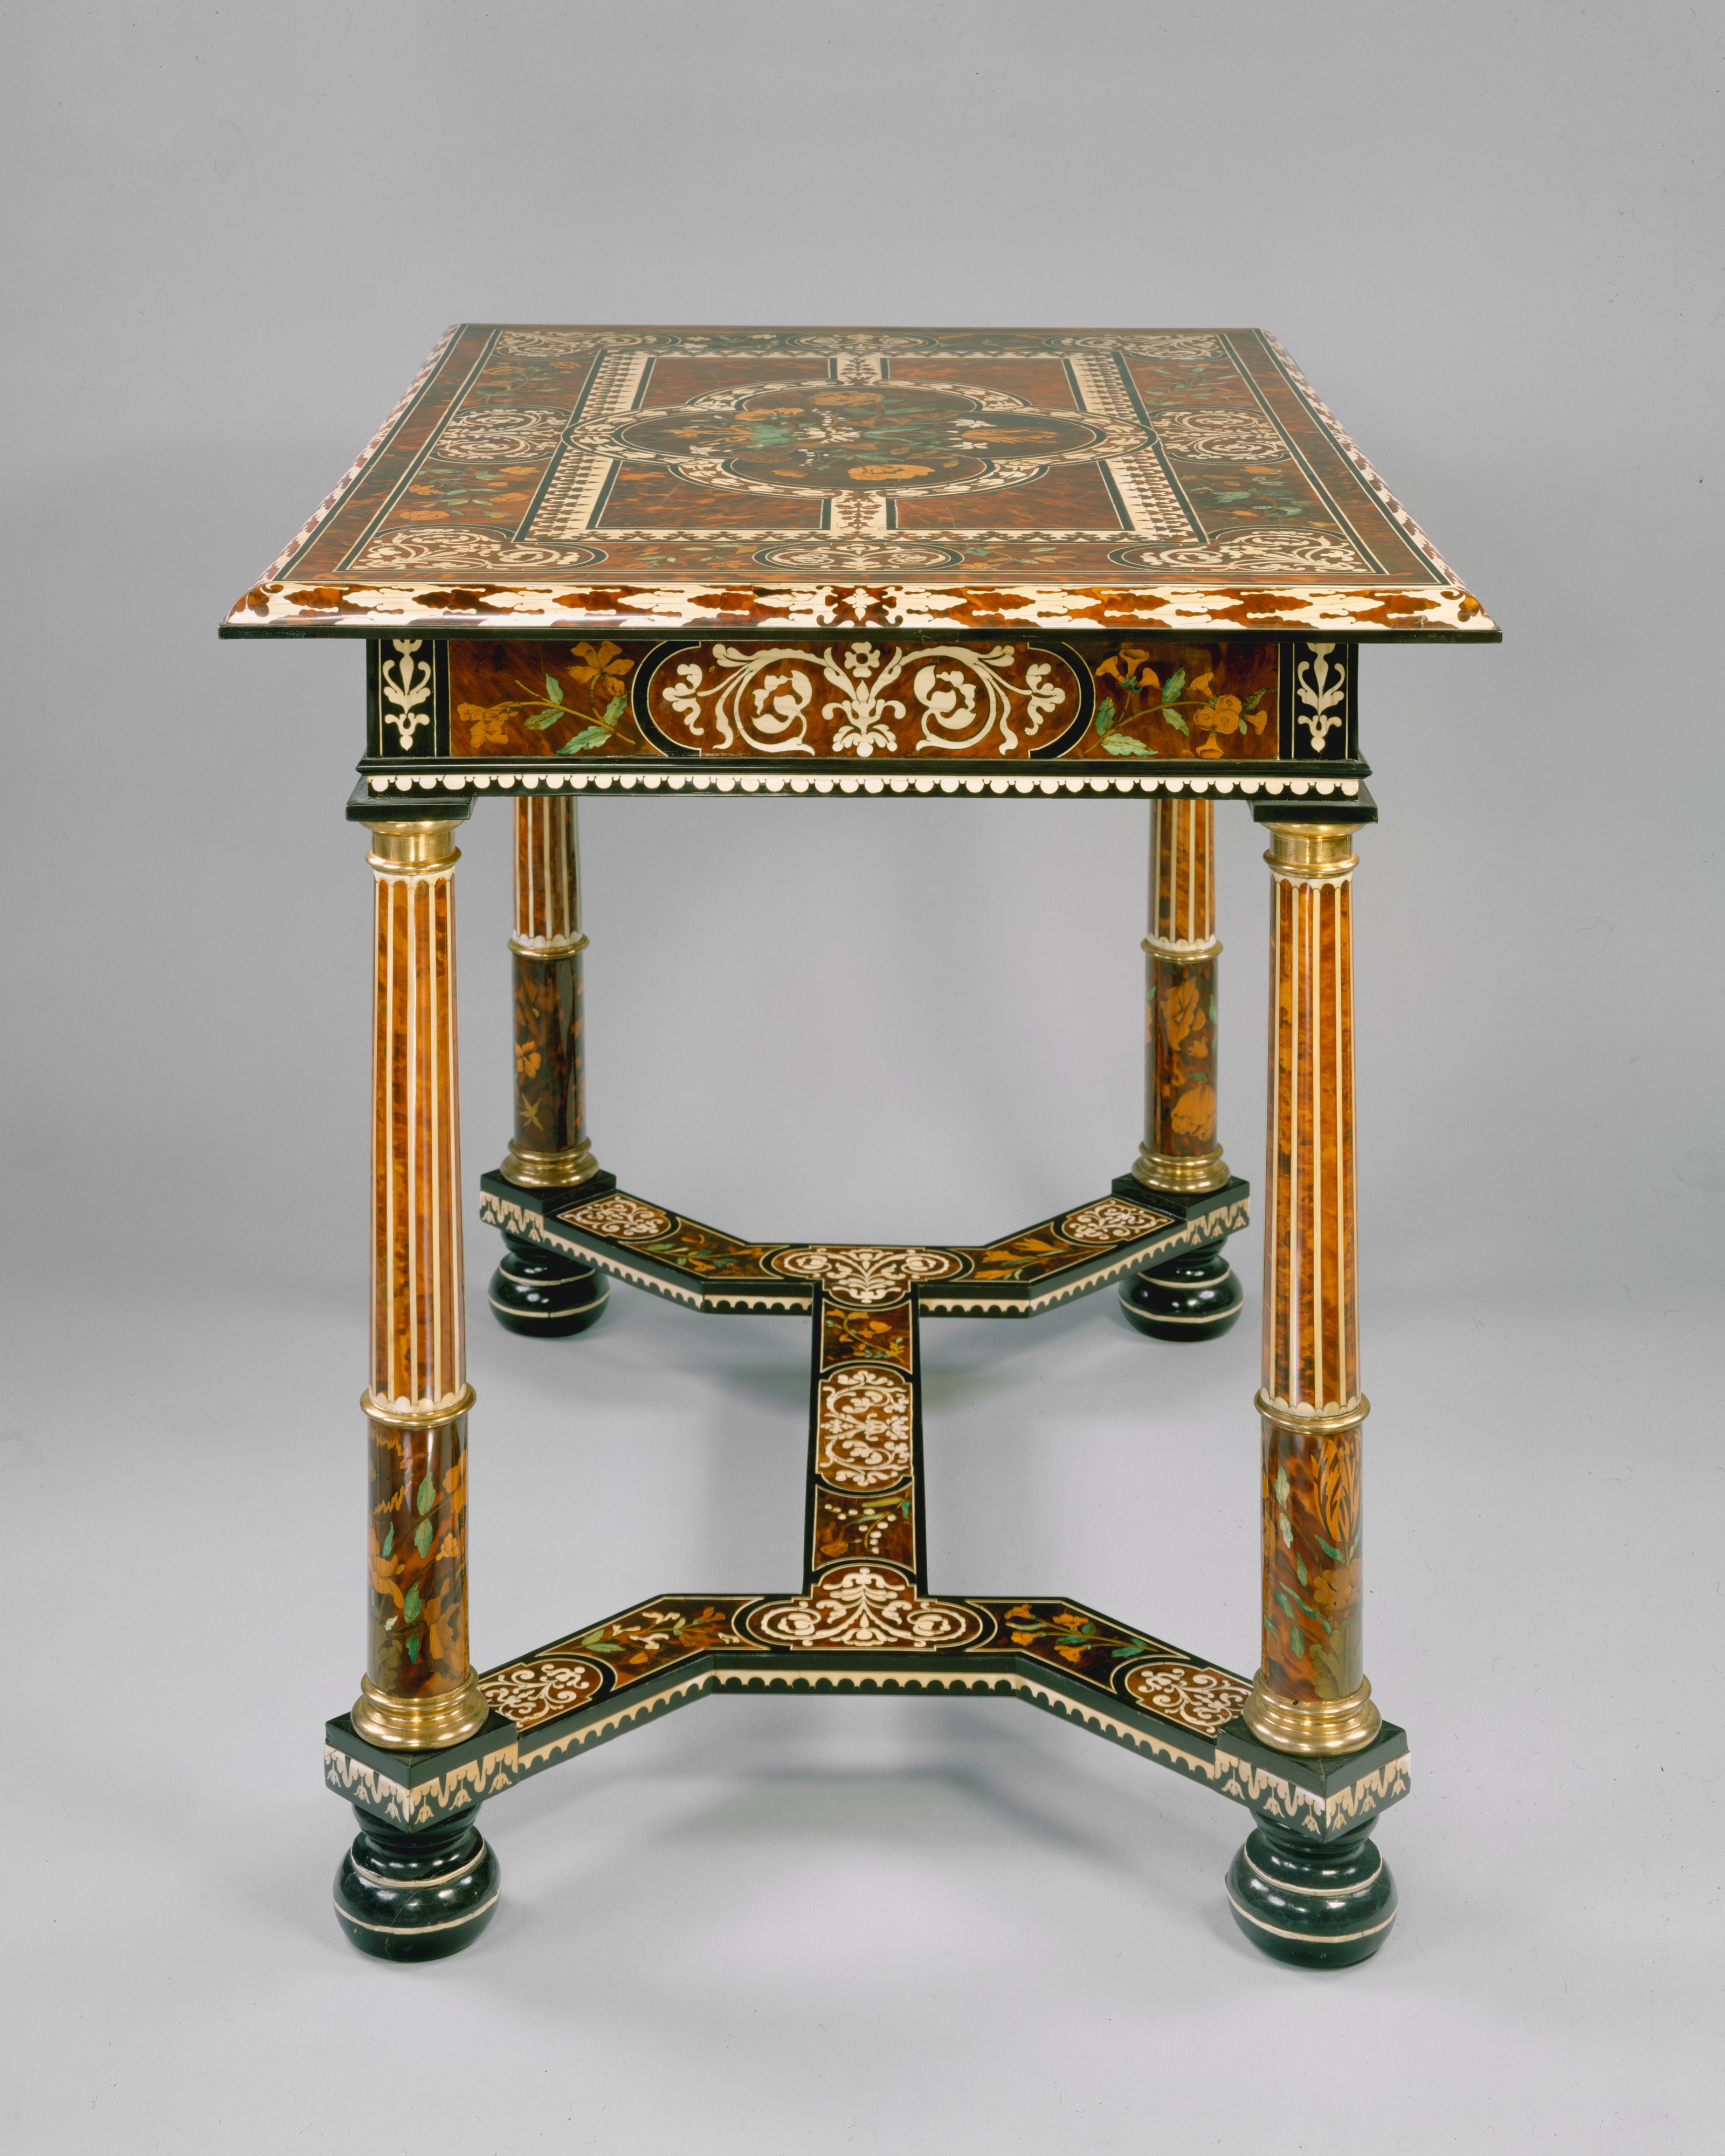 Attributed to Pierre French, | Museum Paris | Art | Table The of Metropolitan Gole